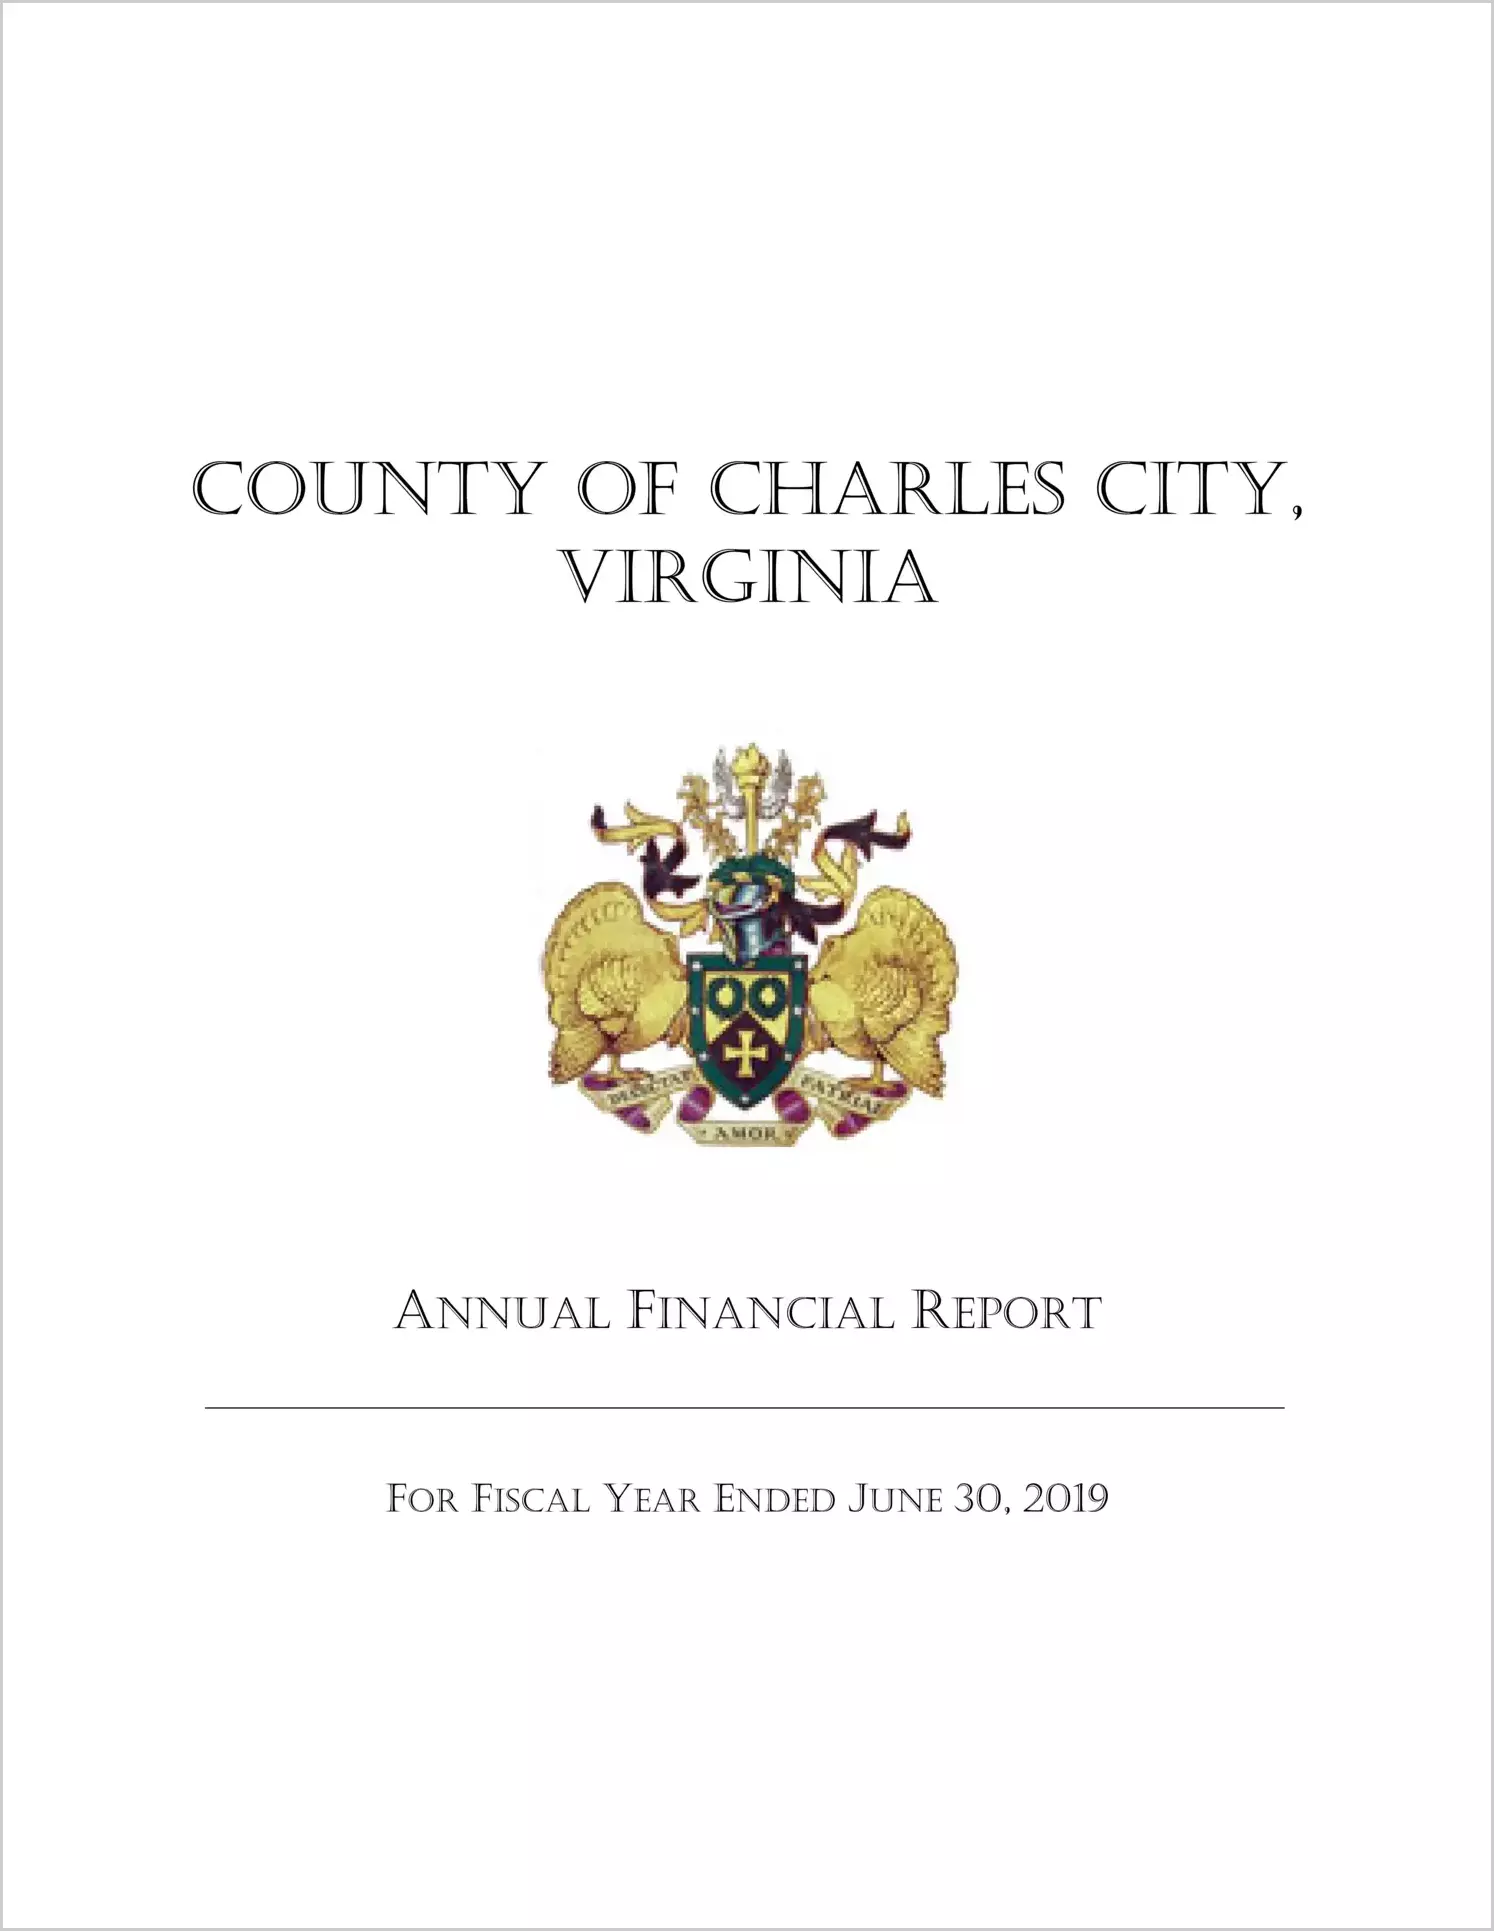 2019 Annual Financial Report for County of Charles City